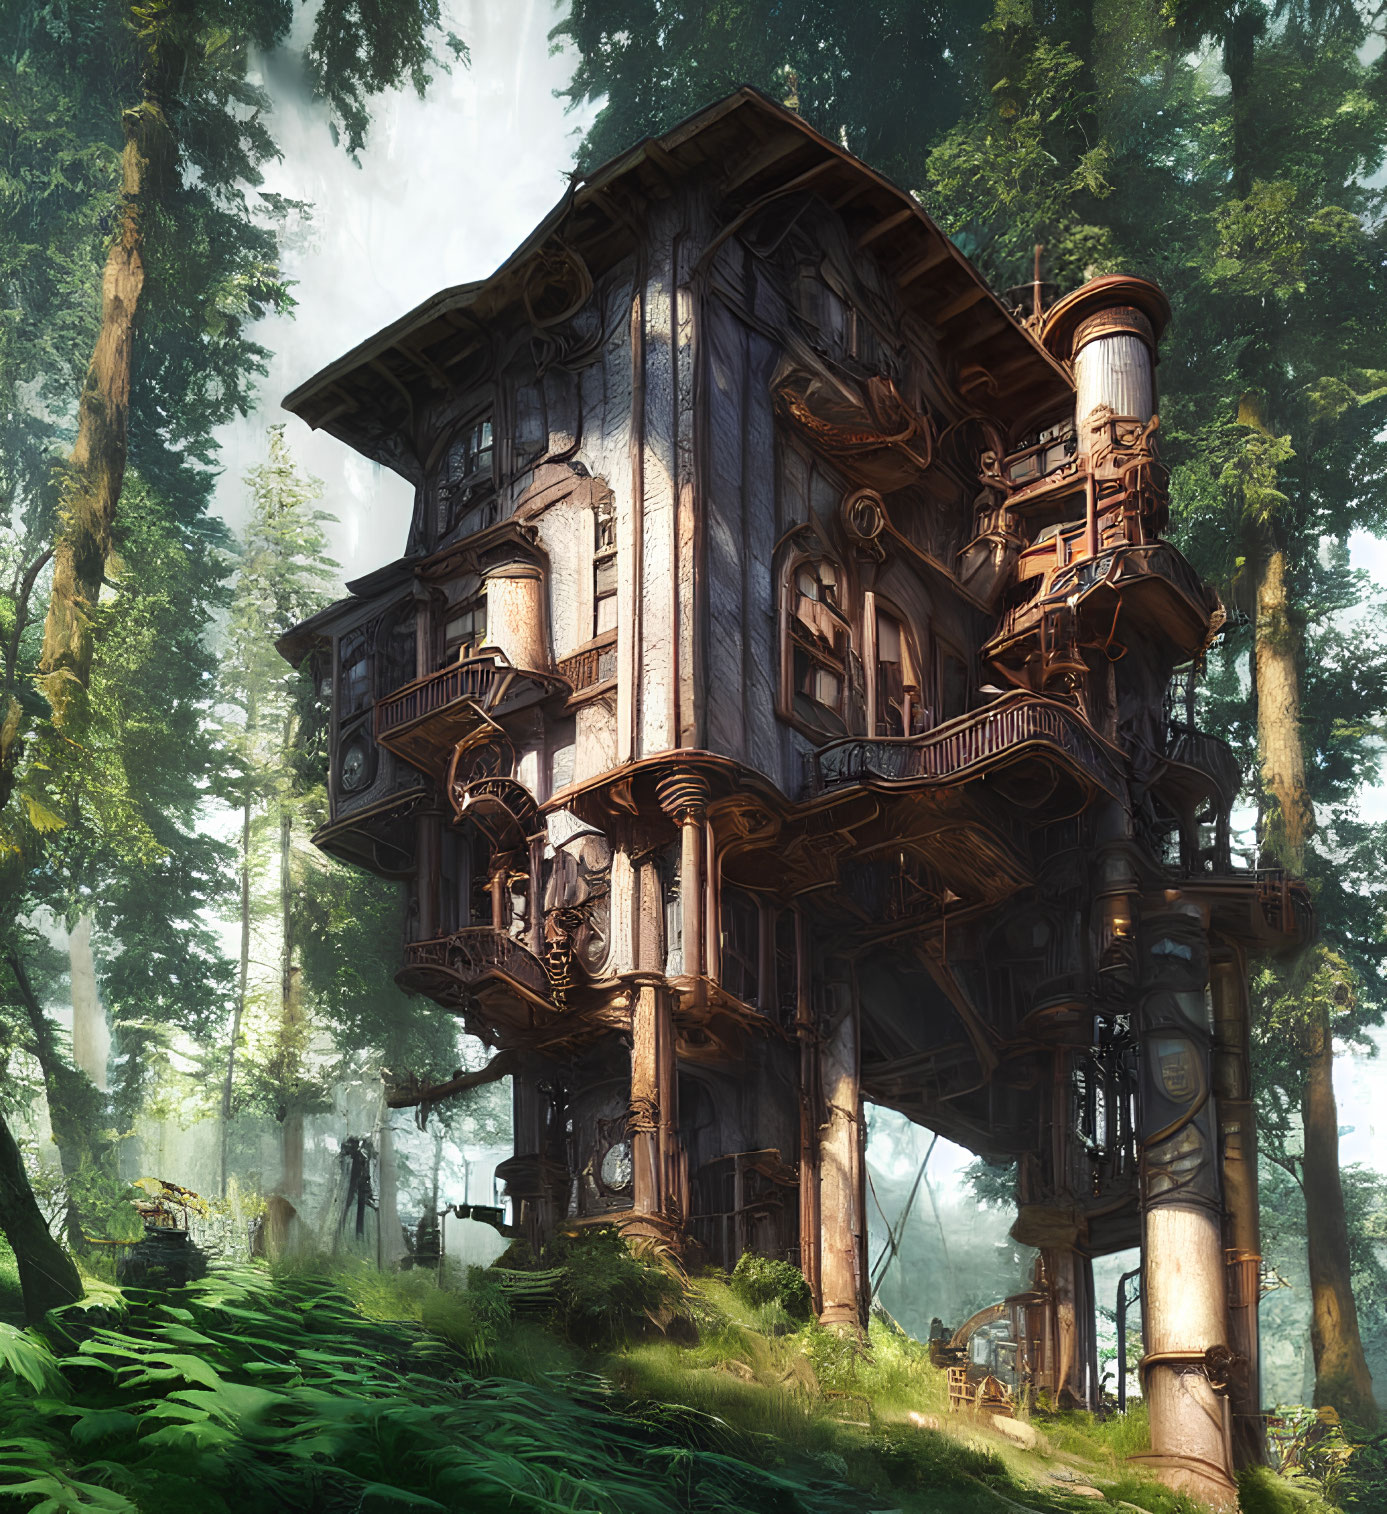 Elaborate multi-story treehouse in lush forest